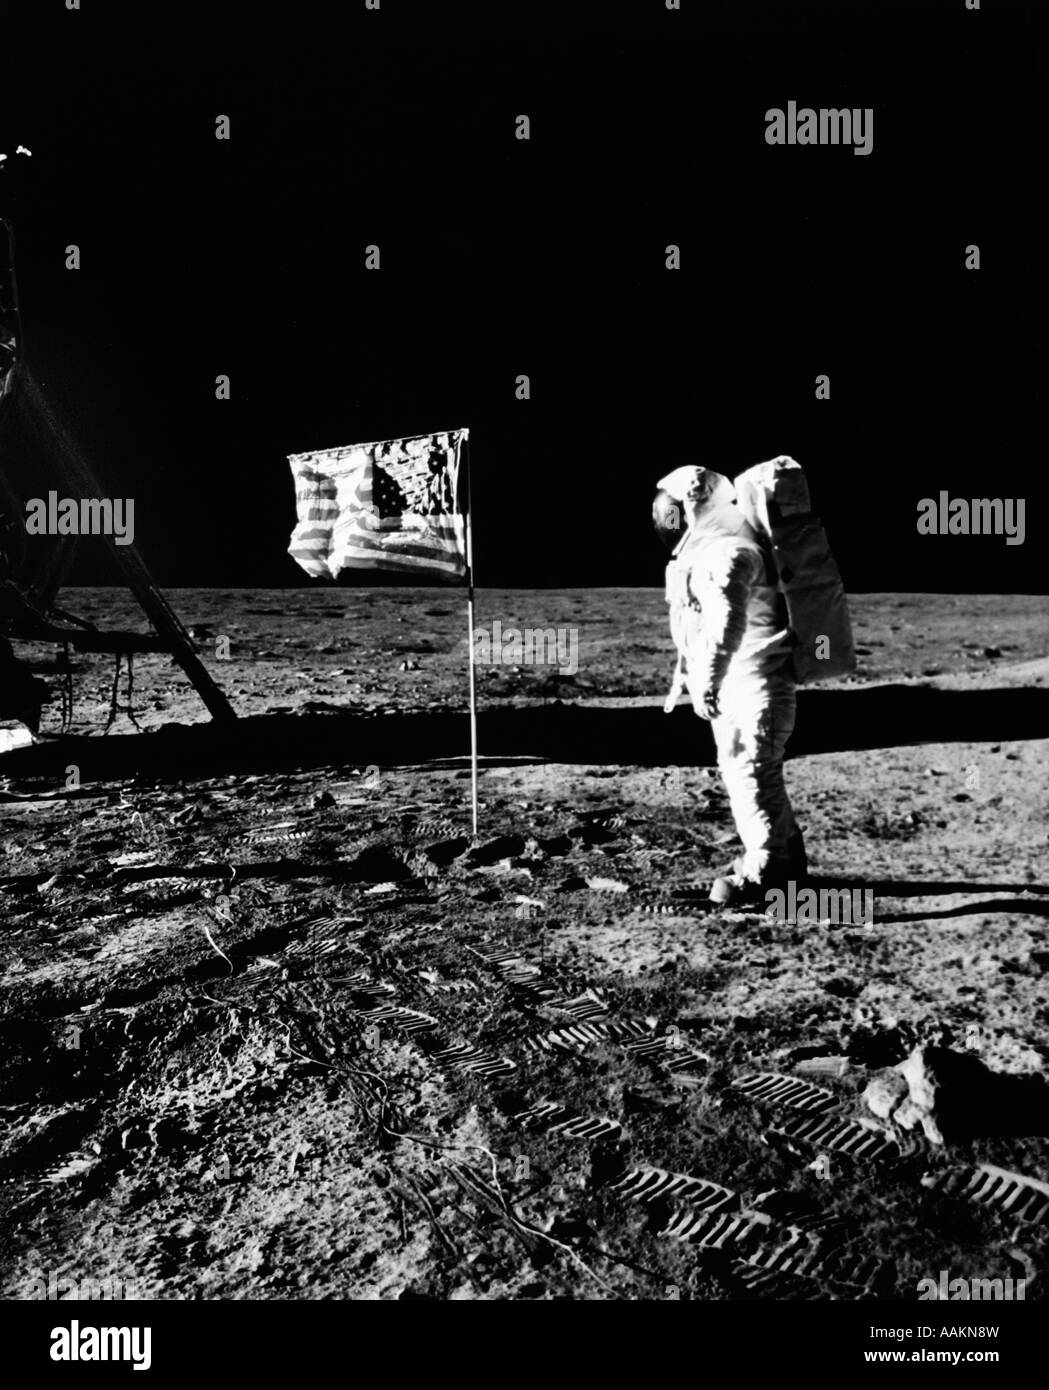 1969 ASTRONAUT U.S. FLAG AND LEG OF LUNAR LANDER ON THE SURFACE OF THE MOON Stock Photo